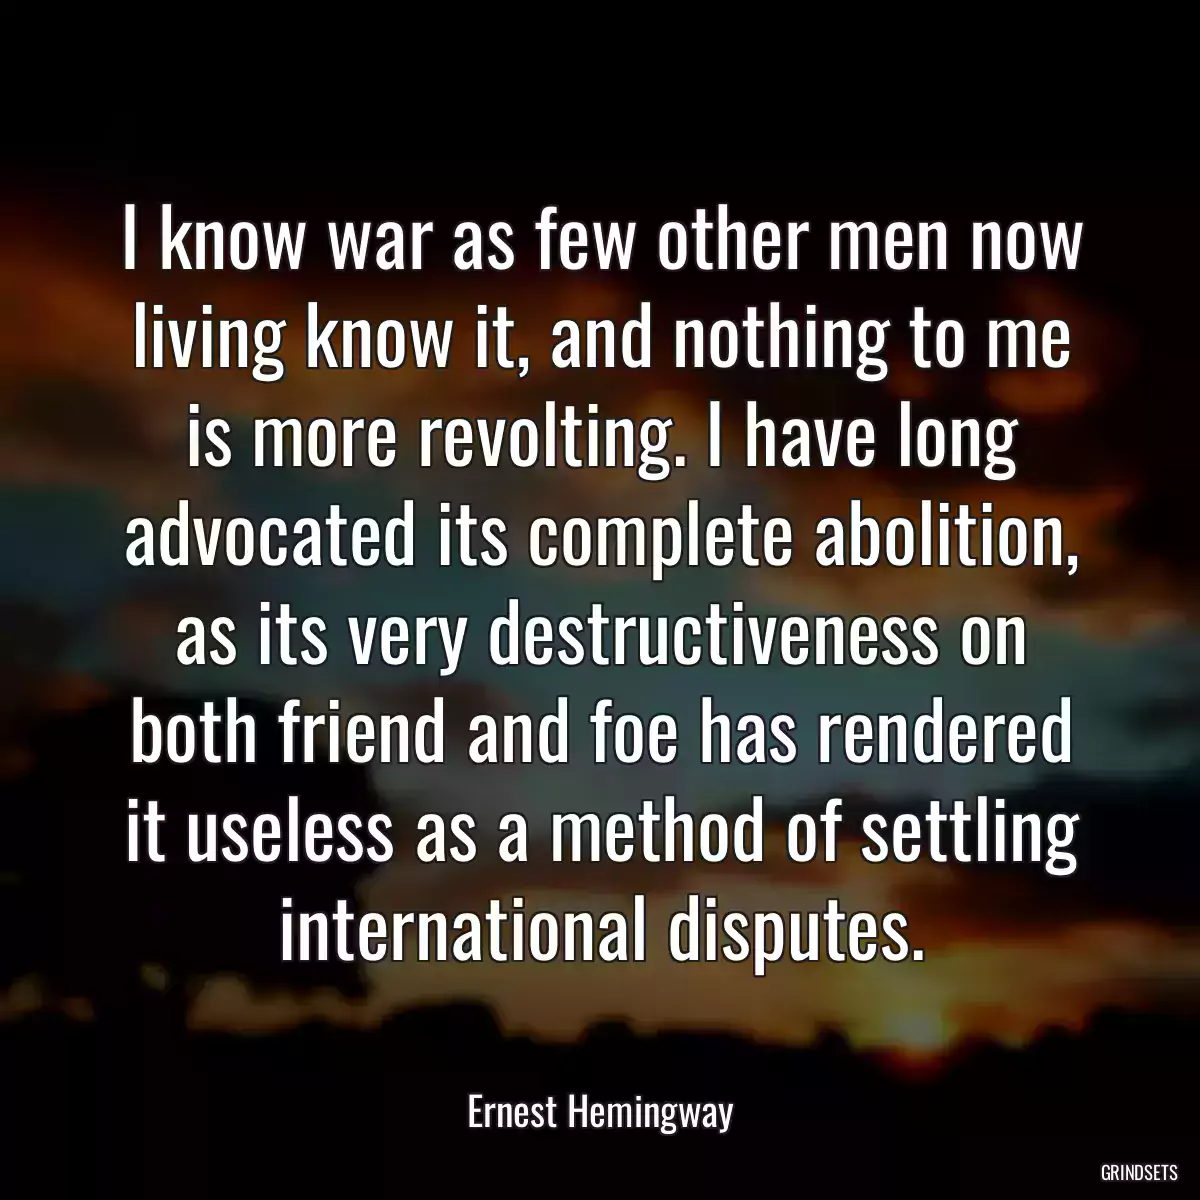 I know war as few other men now living know it, and nothing to me is more revolting. I have long advocated its complete abolition, as its very destructiveness on both friend and foe has rendered it useless as a method of settling international disputes.